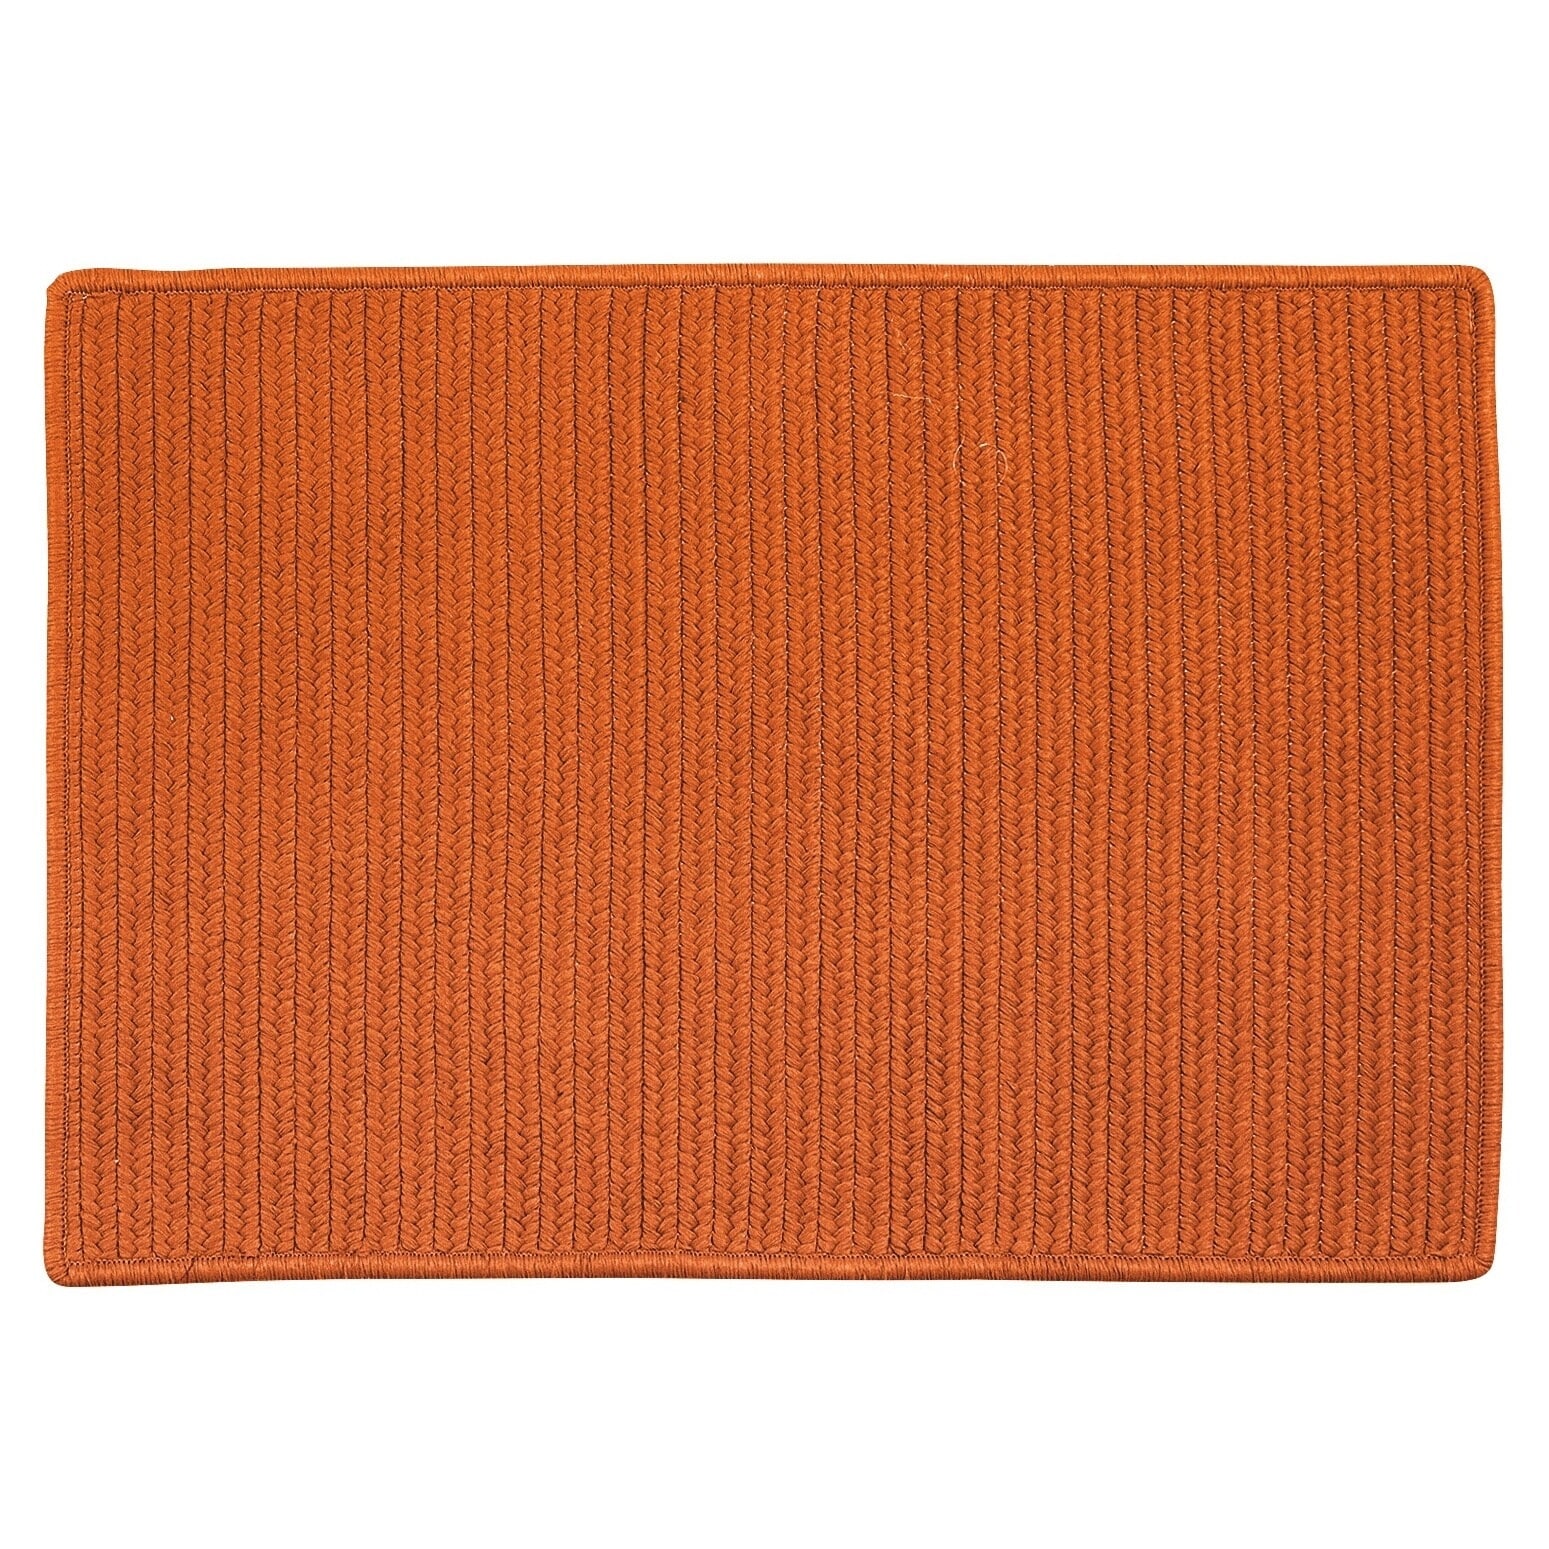 https://ak1.ostkcdn.com/images/products/is/images/direct/f63eb94772a2eab38061304bf4eb200ded23caf6/Low-profile-Solid-Color-Indoor-Outdoor-Reversible-Braided-Doormat.jpg